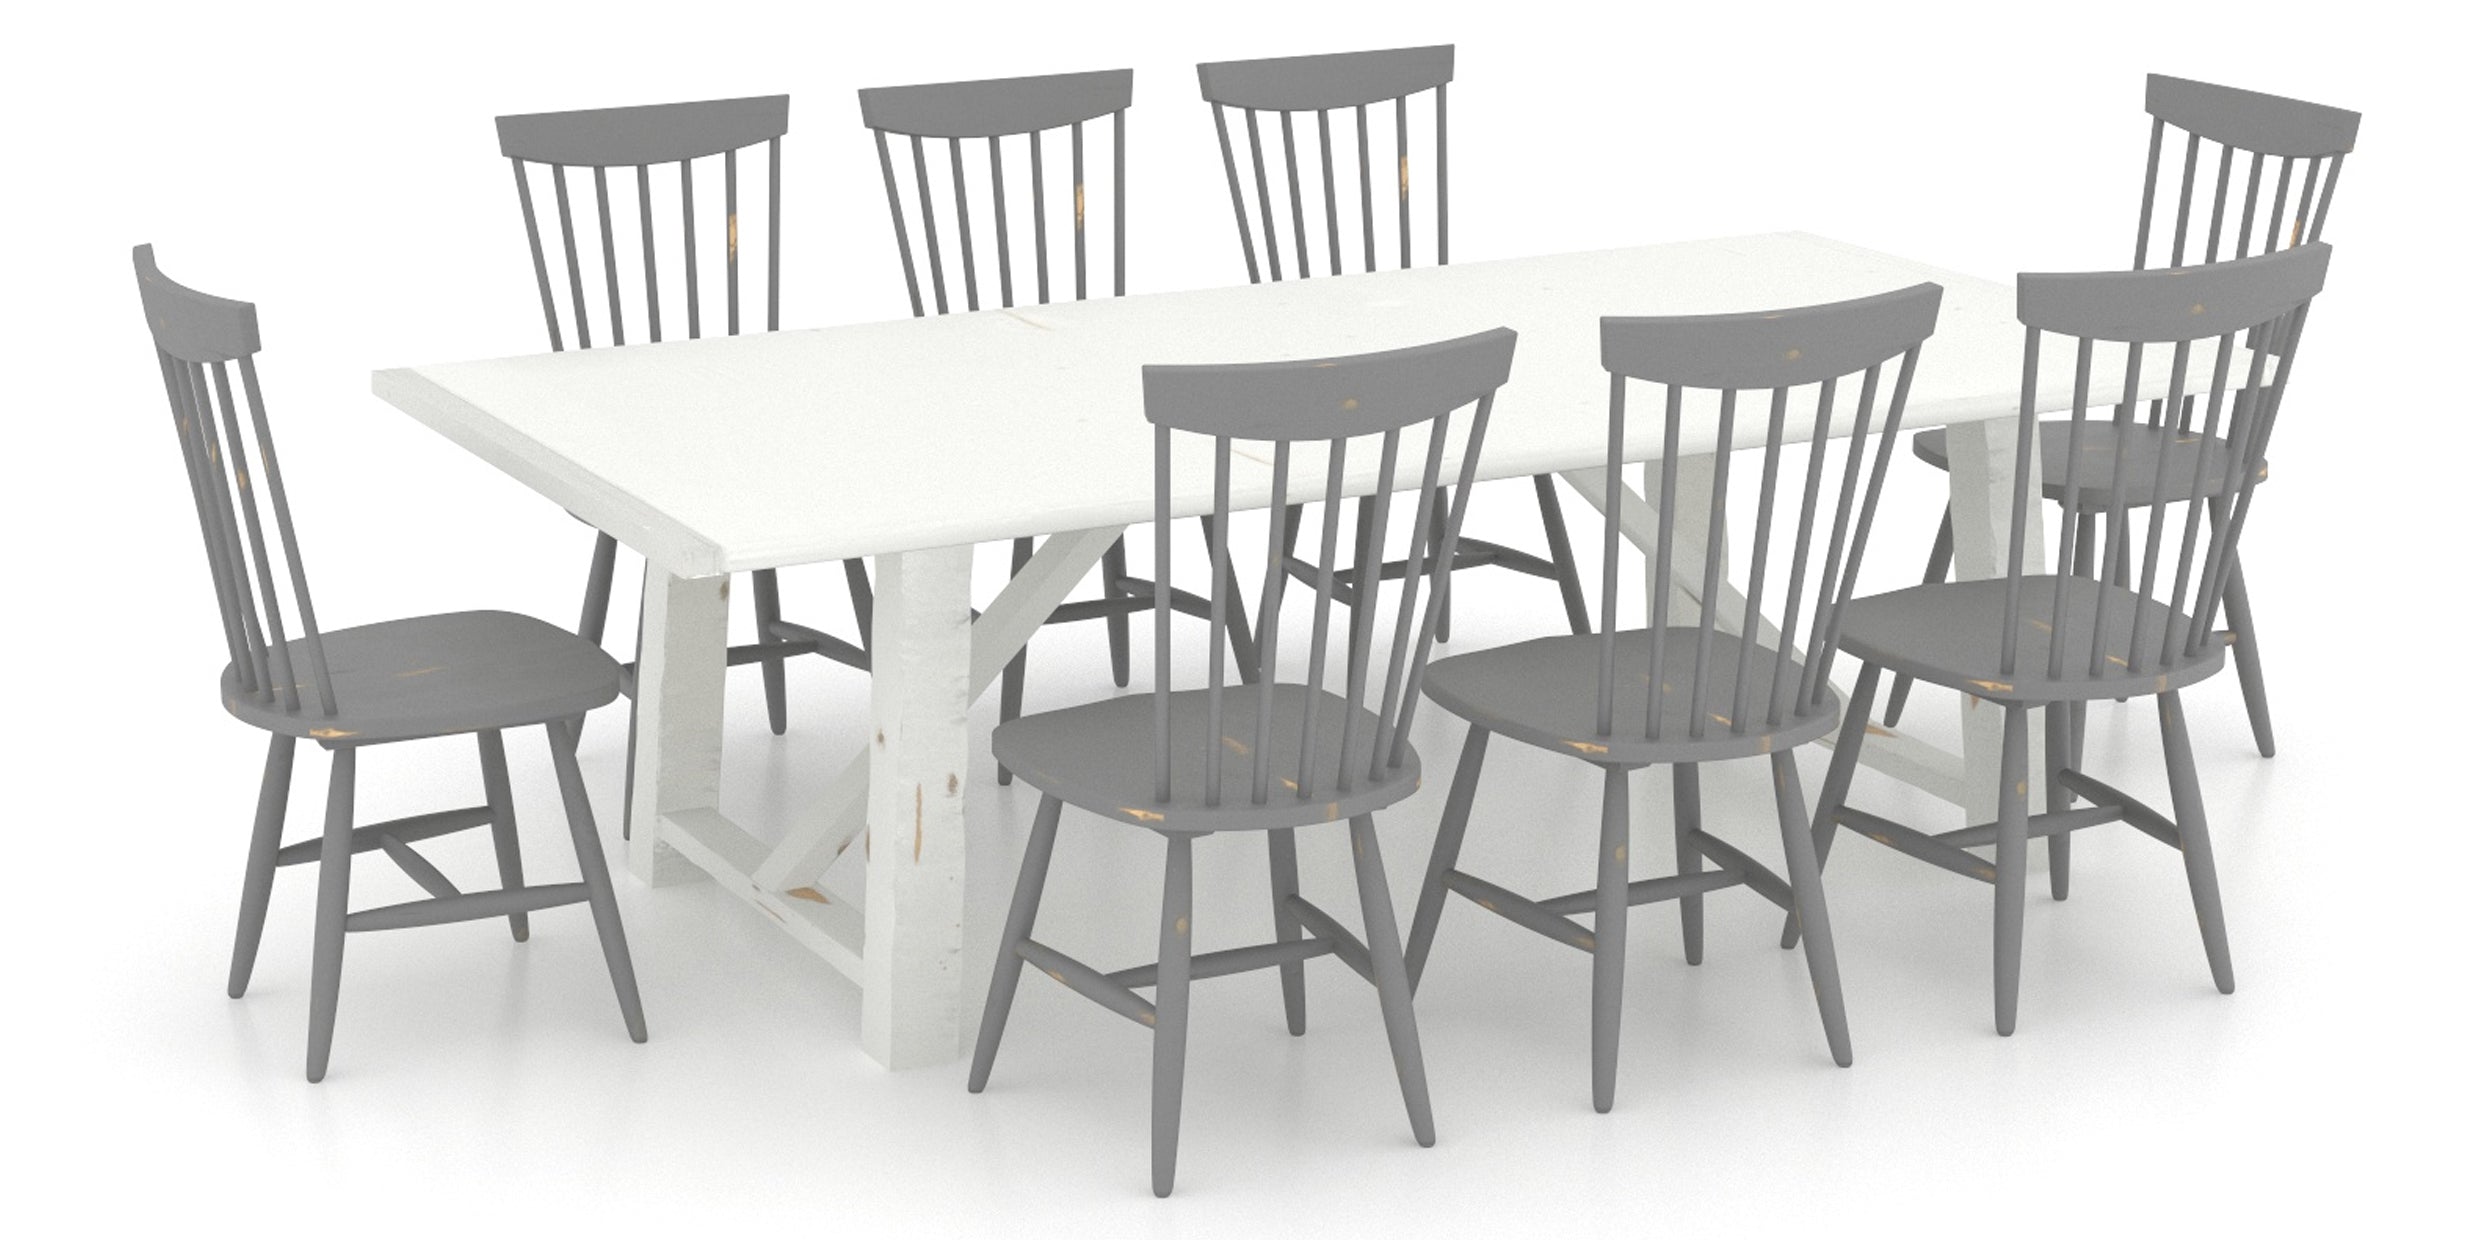 Dove White Birch and Steel Grey Birch with Distressed Finish | Canadel Champlain 4896 Dining Set | Valley Ridge Furniture